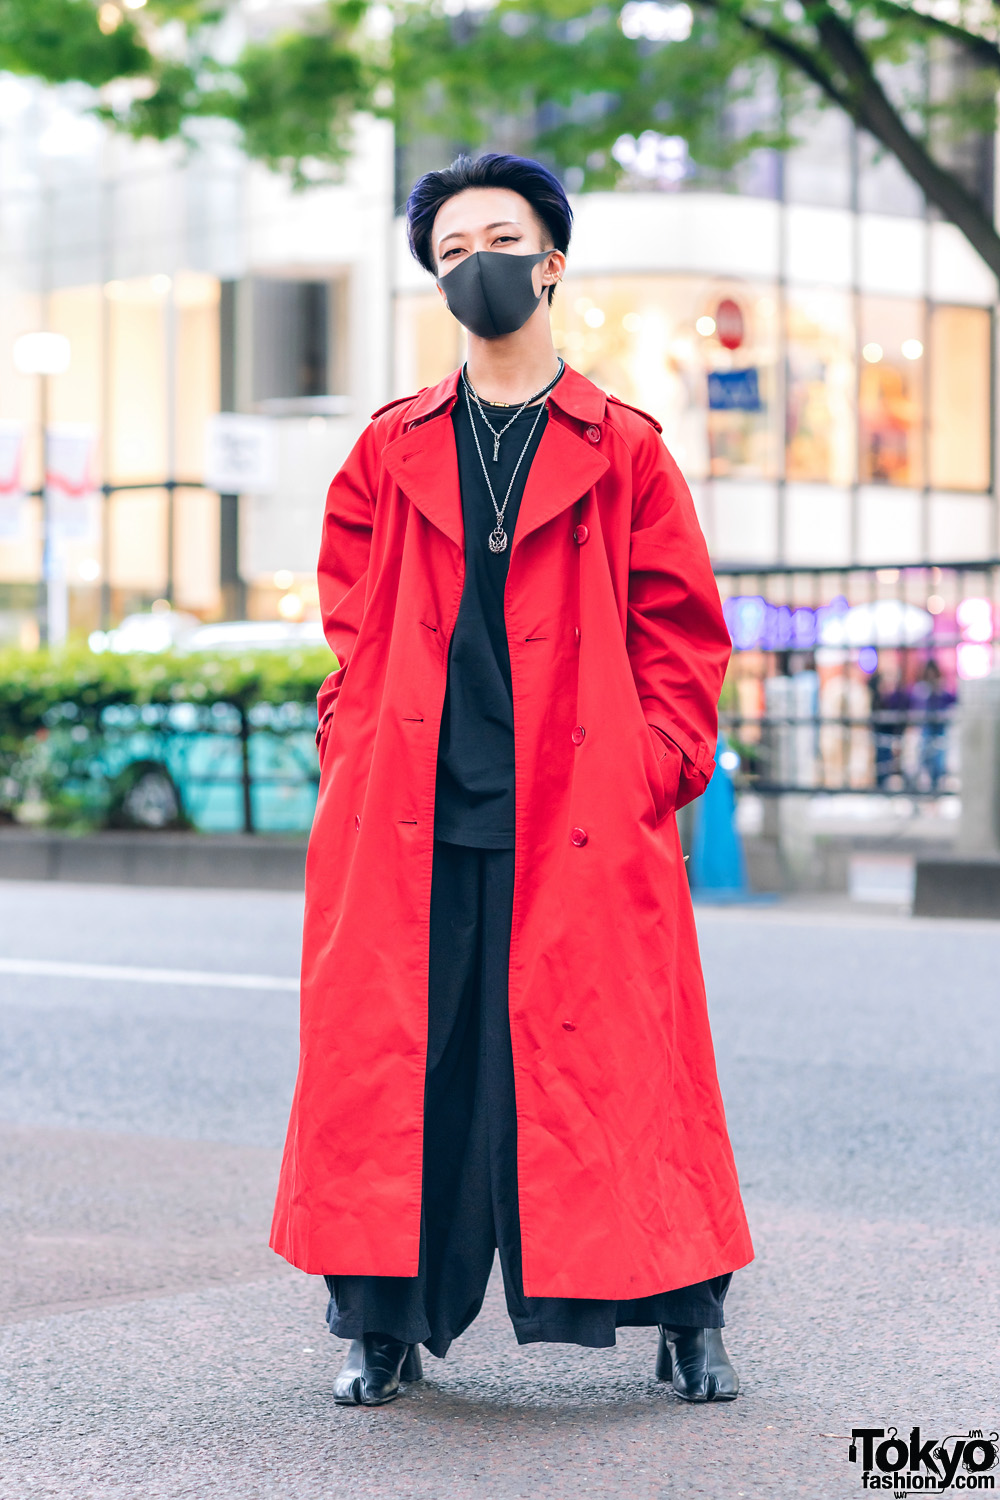 Red & Black Menswear Street Fashion w/ Black Mask, Burberry Trench Coat, Hare, Notch Wide Leg Pants, SAAD Necklaces & Bella By Bella Tabi Boots